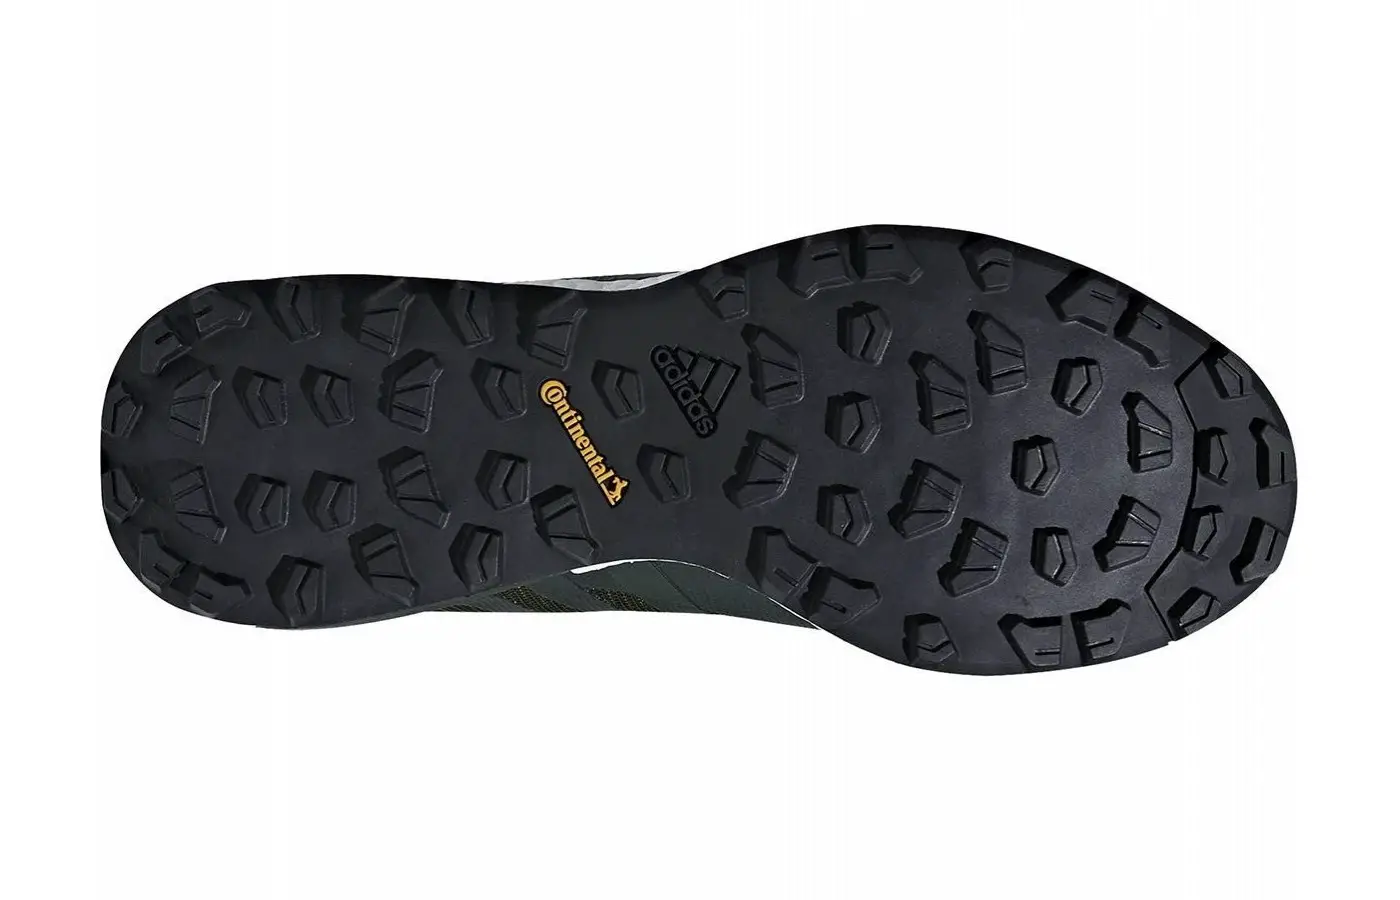 The outsole is the major highlight of the Terrex Agravic. 